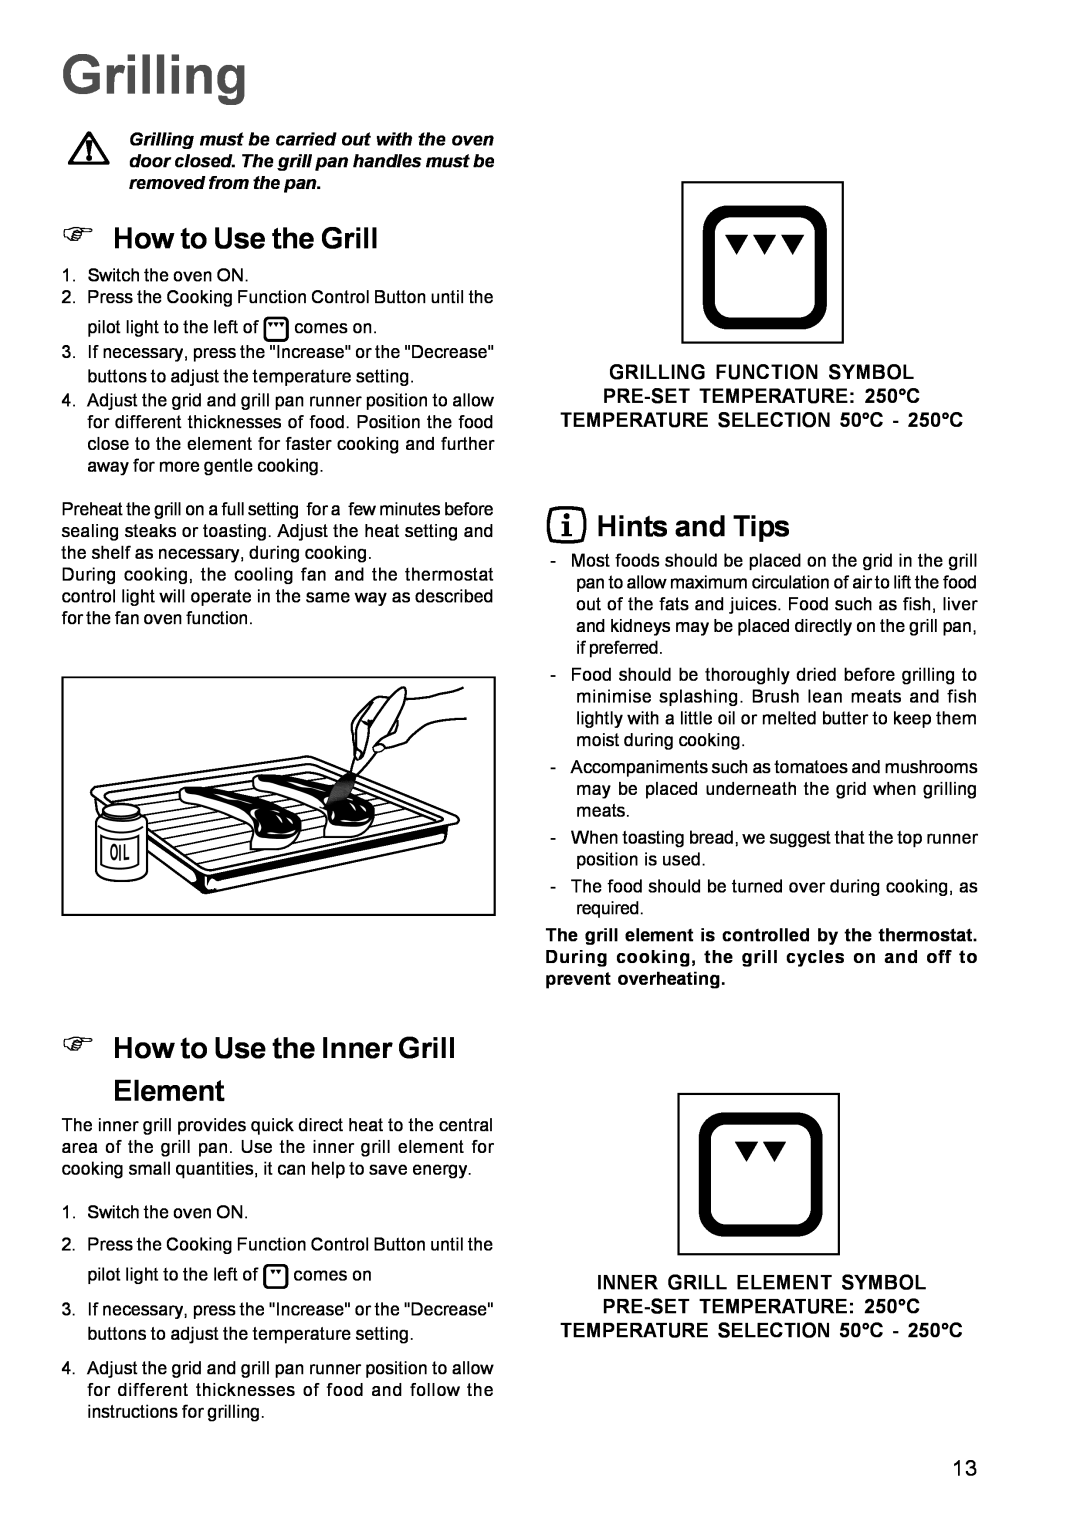 Zanussi ZBM 972 manual Grilling, Φ How to Use the Grill, Φ How to Use the Inner Grill Element, Hints and Tips 